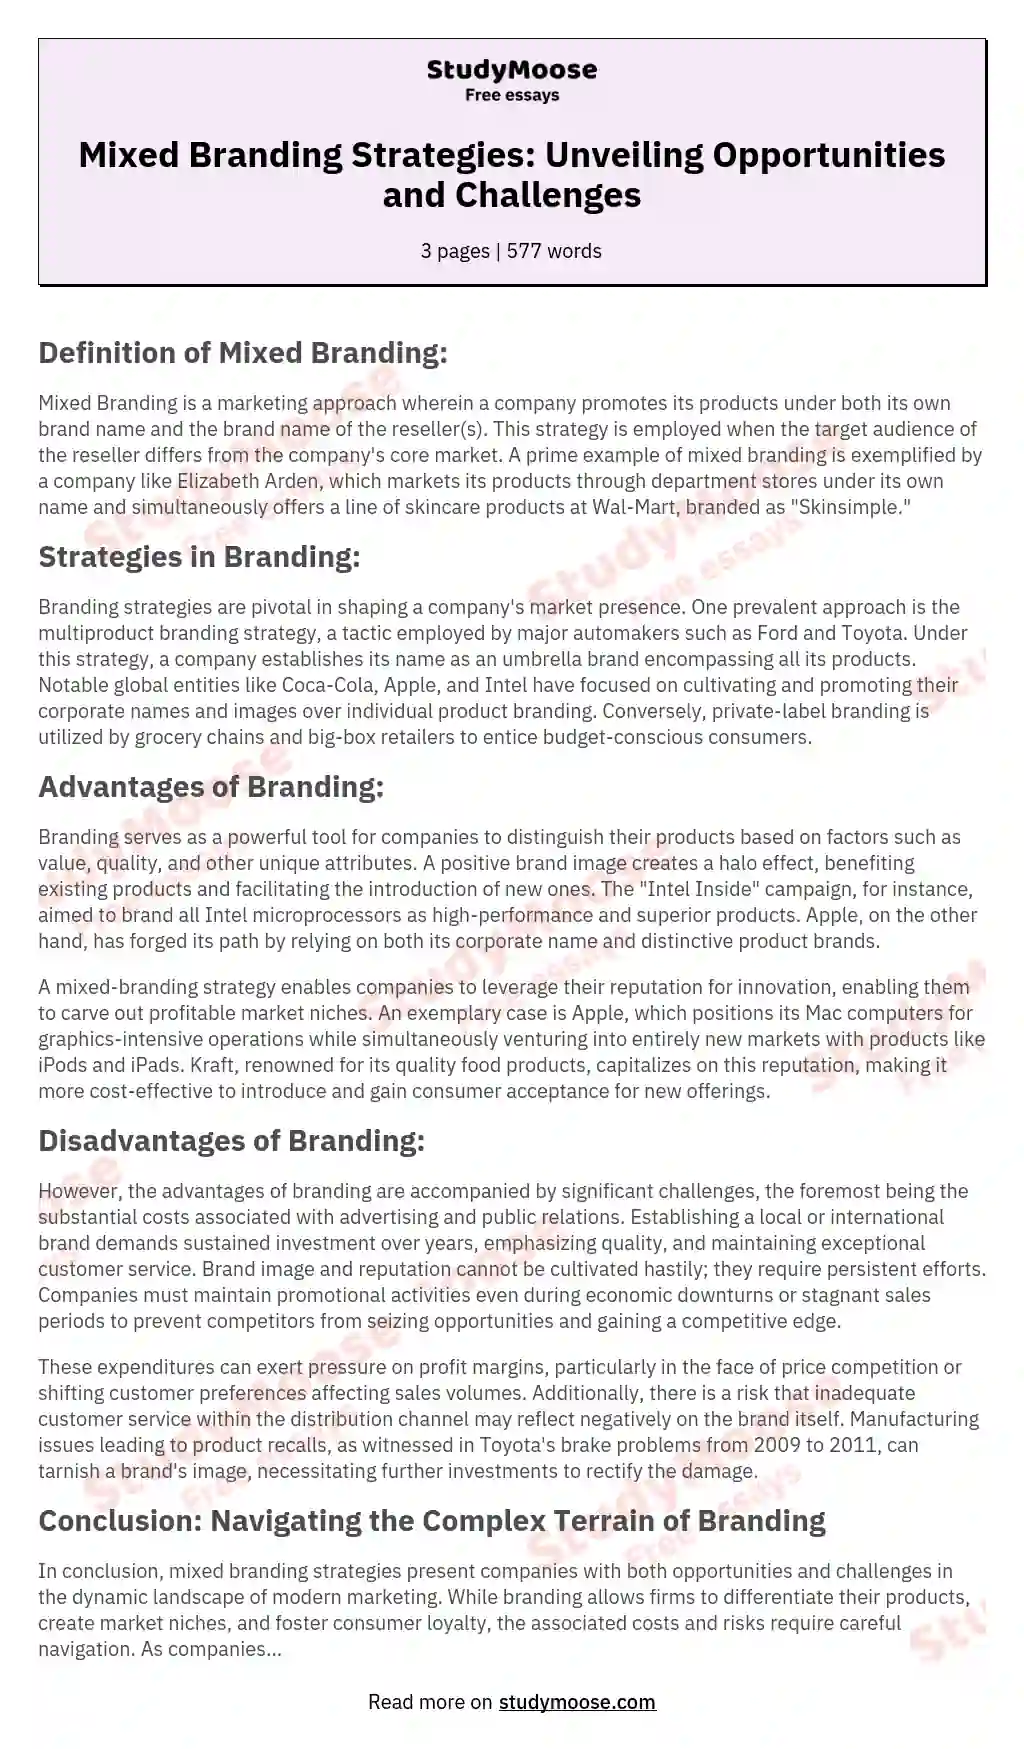 Mixed Branding Strategies: Unveiling Opportunities and Challenges essay